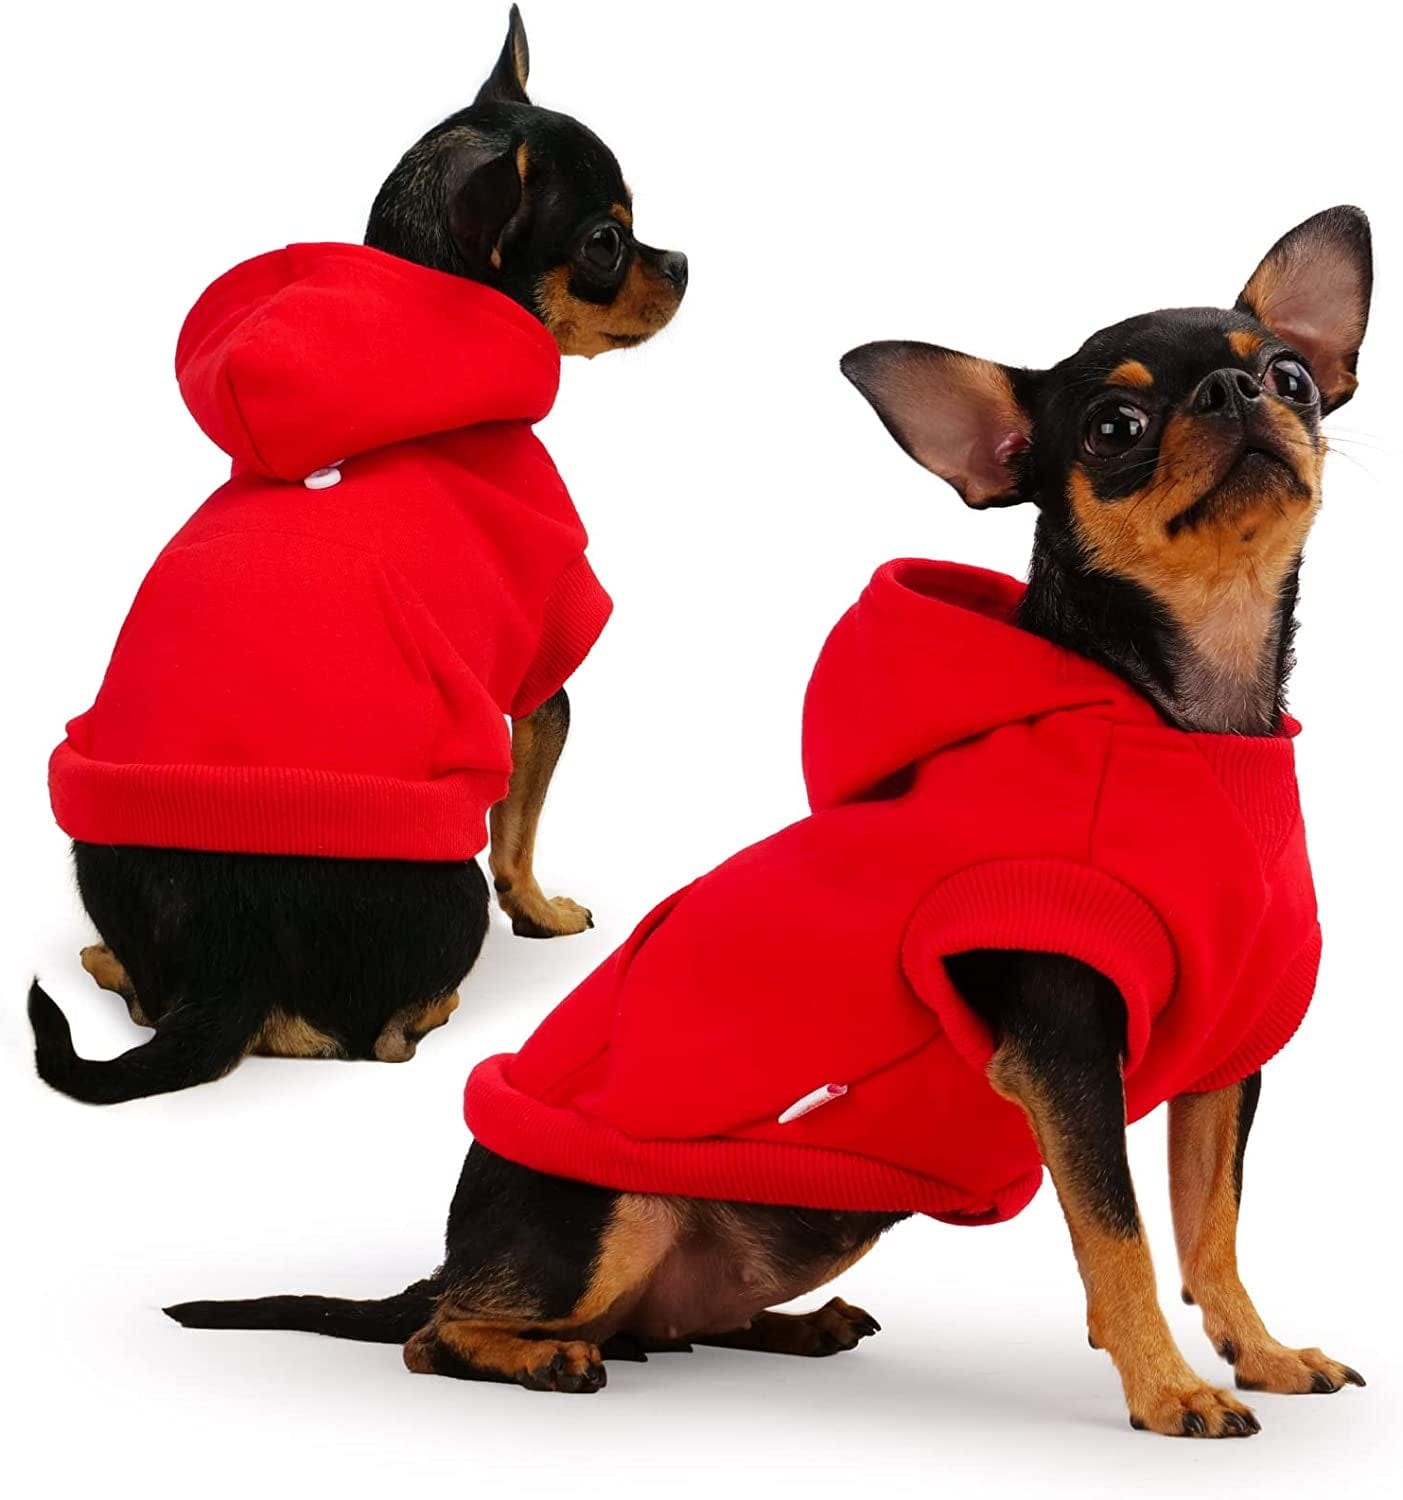 𝐍𝐄𝐖 𝐀𝐑𝐑𝐈𝐕𝐀𝐋 Frienperro Dog Clothes for Small Dogs Girl Boy, 100% Cotton Buffalo Plaid Small Dog Hoodie, Chihuahua Clothes Pet Cat Winter Warm Sweatshirt Sweater, Teacup Yorkie Puppy Coat Animals & Pet Supplies > Pet Supplies > Dog Supplies > Dog Apparel Frienperro Red X-Small 